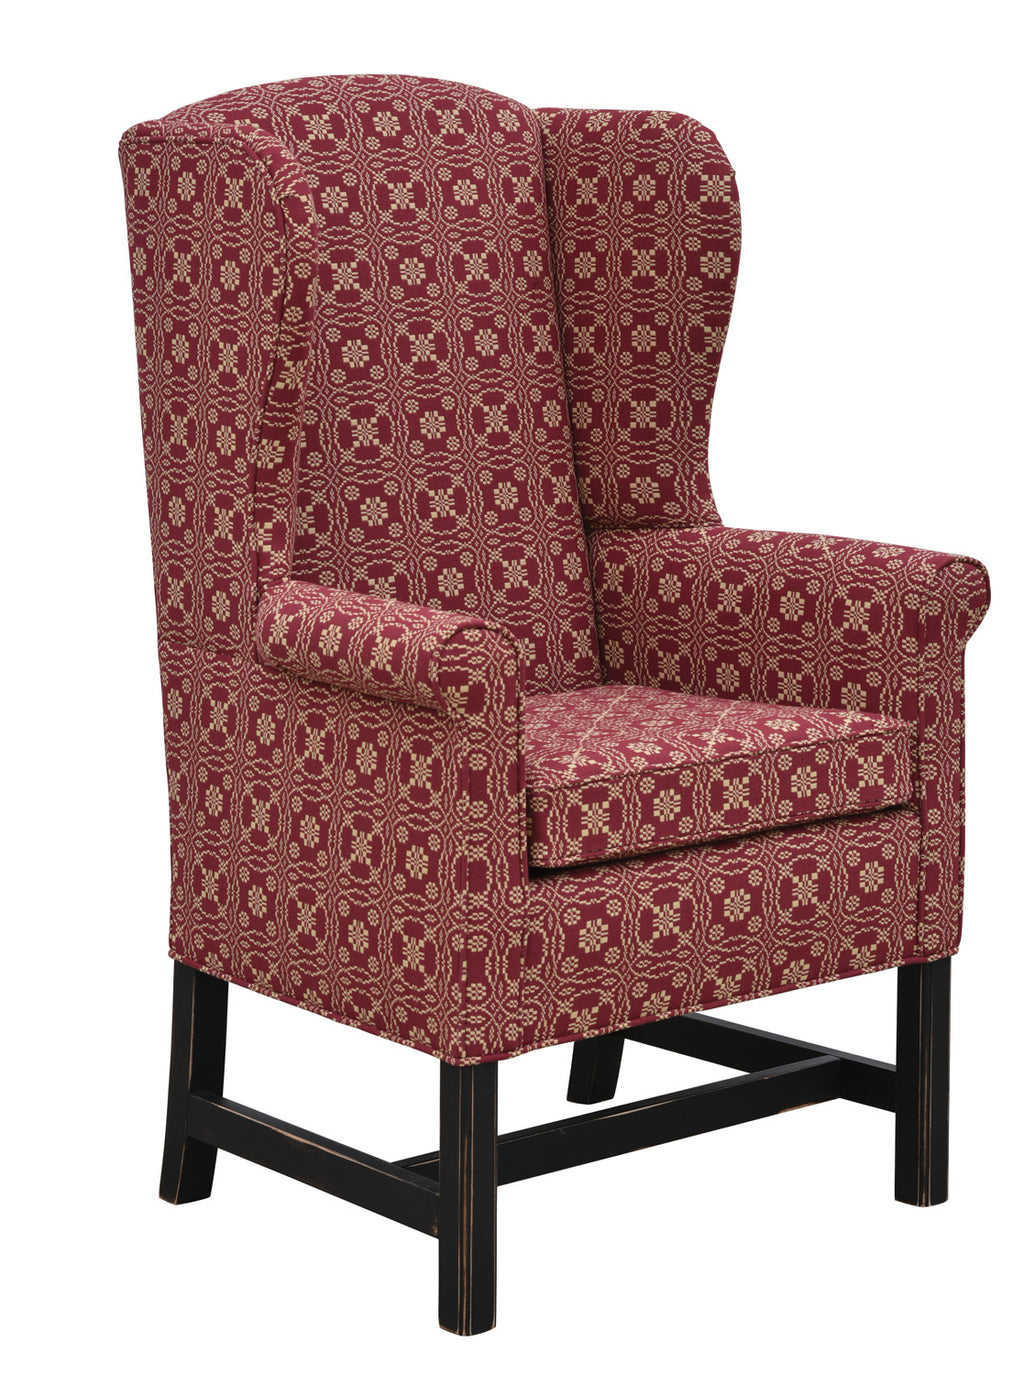 Library Wing Chair